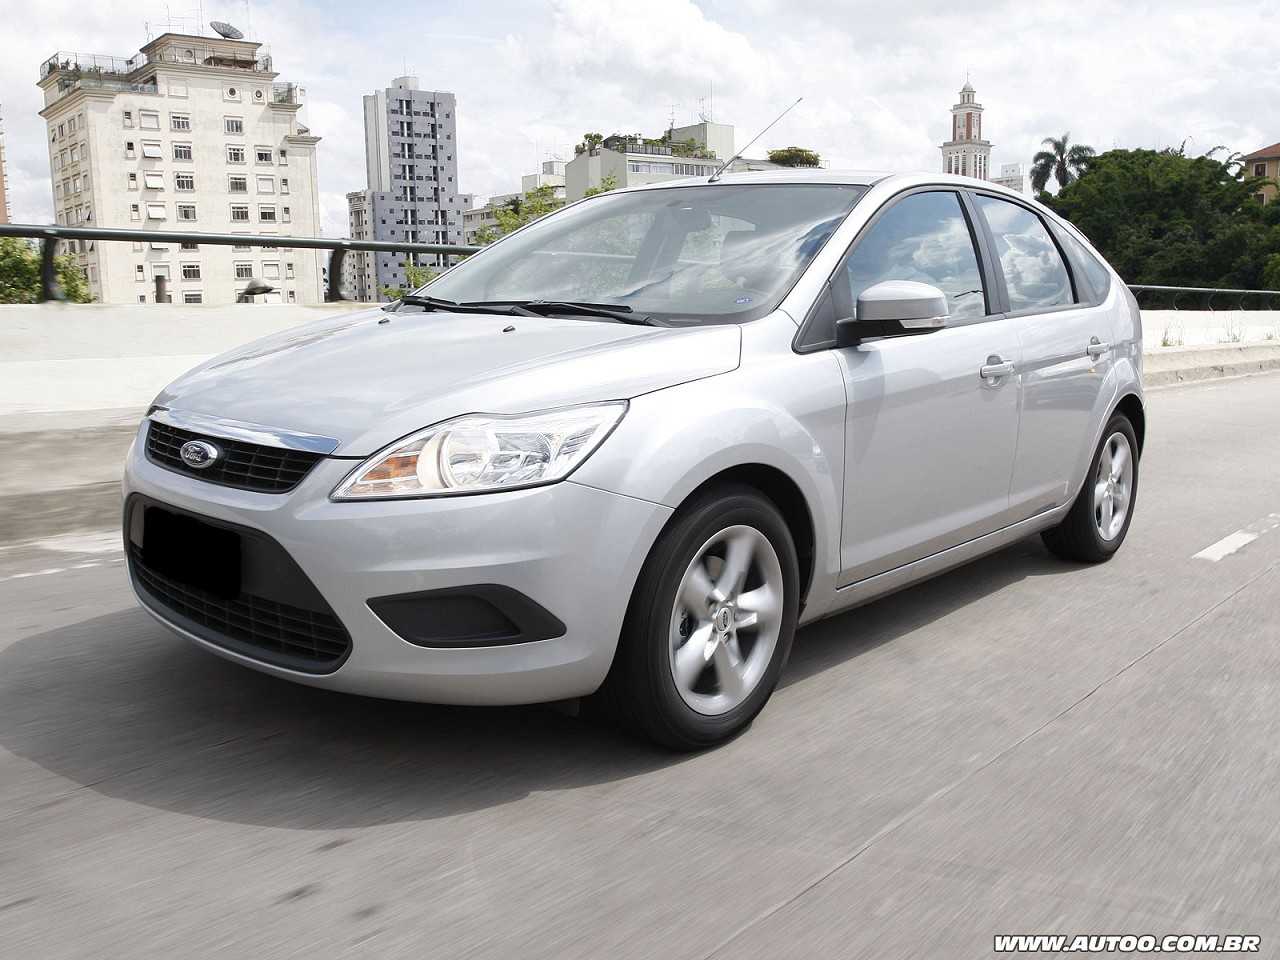 FordFocus 2011 - ngulo frontal